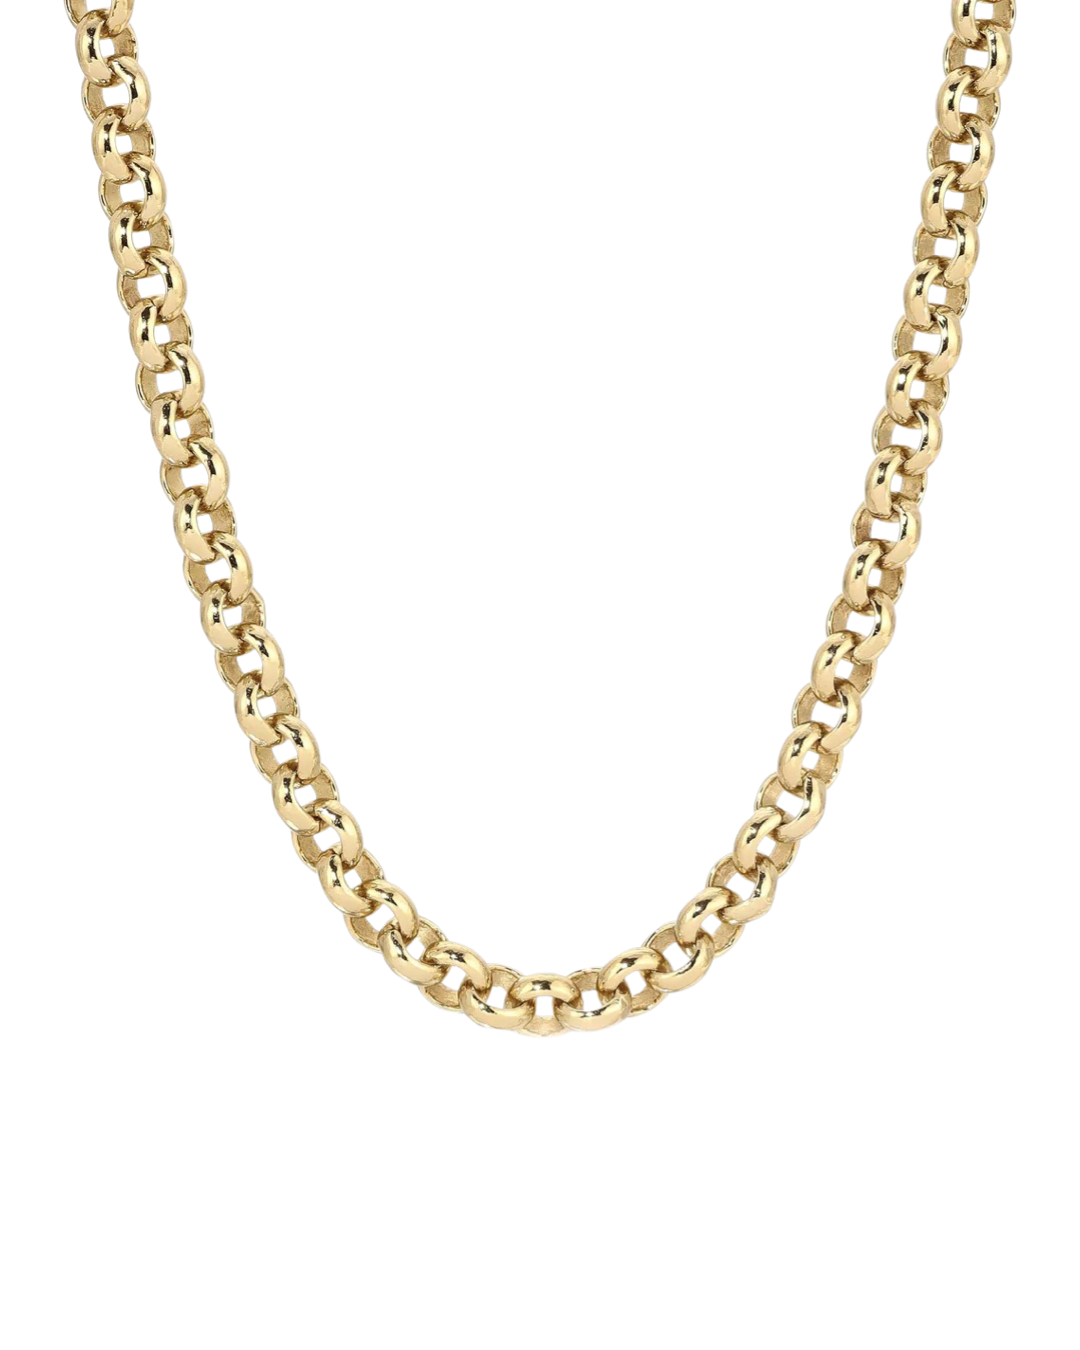 Micro Royal Rolo Chain in Gold 20"